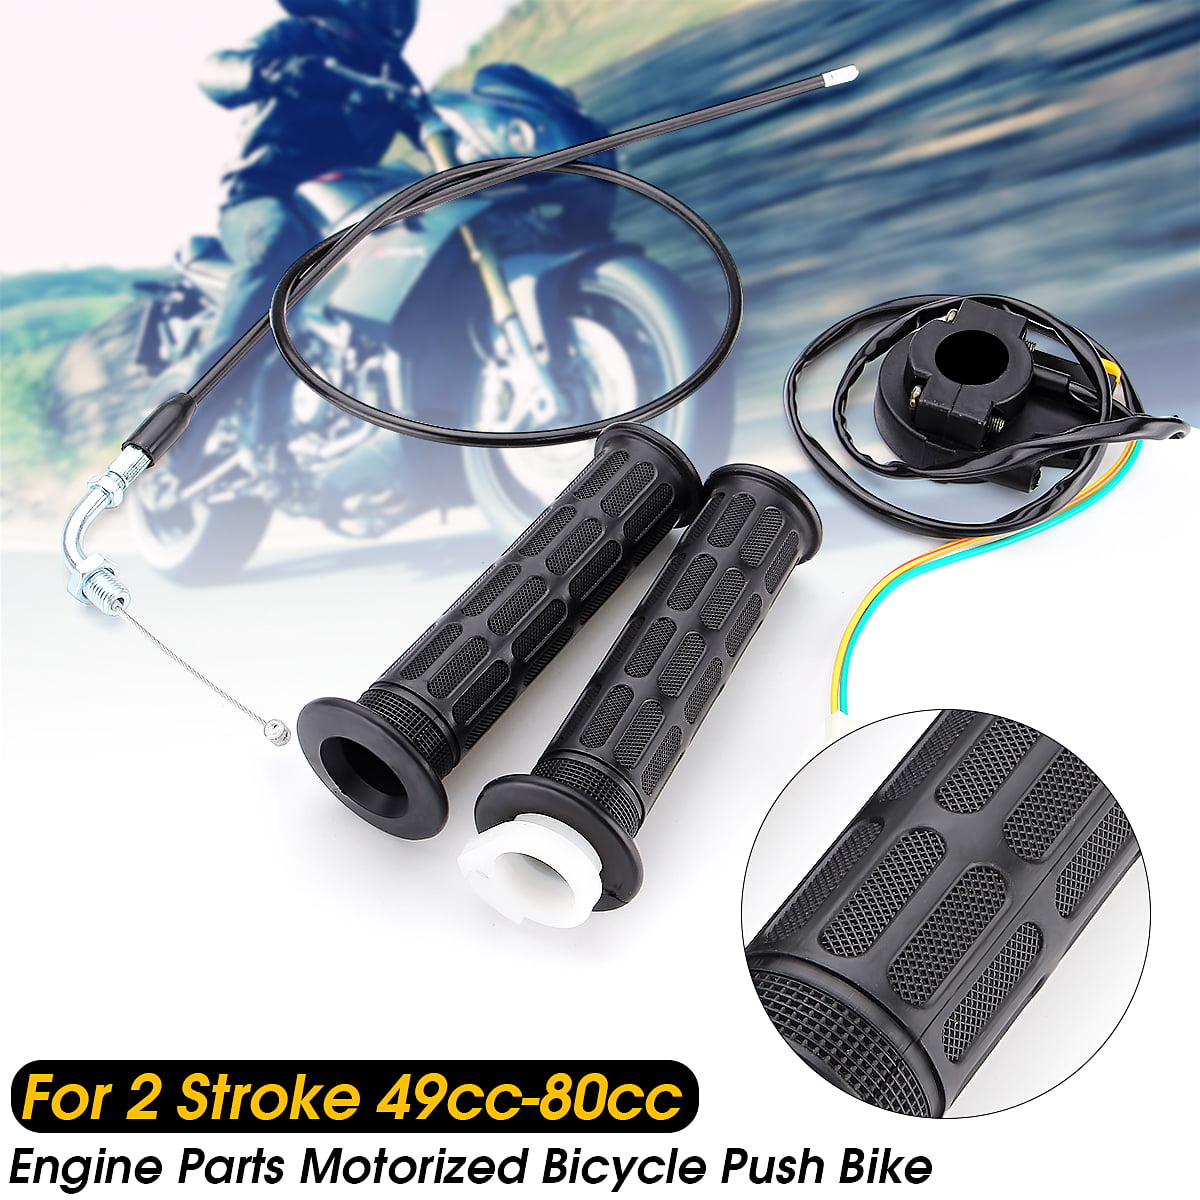 HURI Kill Switch Handle Bar Throttle Cable Clutch Lever for Motorized Bicycle Bike 49cc 66cc 80cc 2 Stroke Engine 